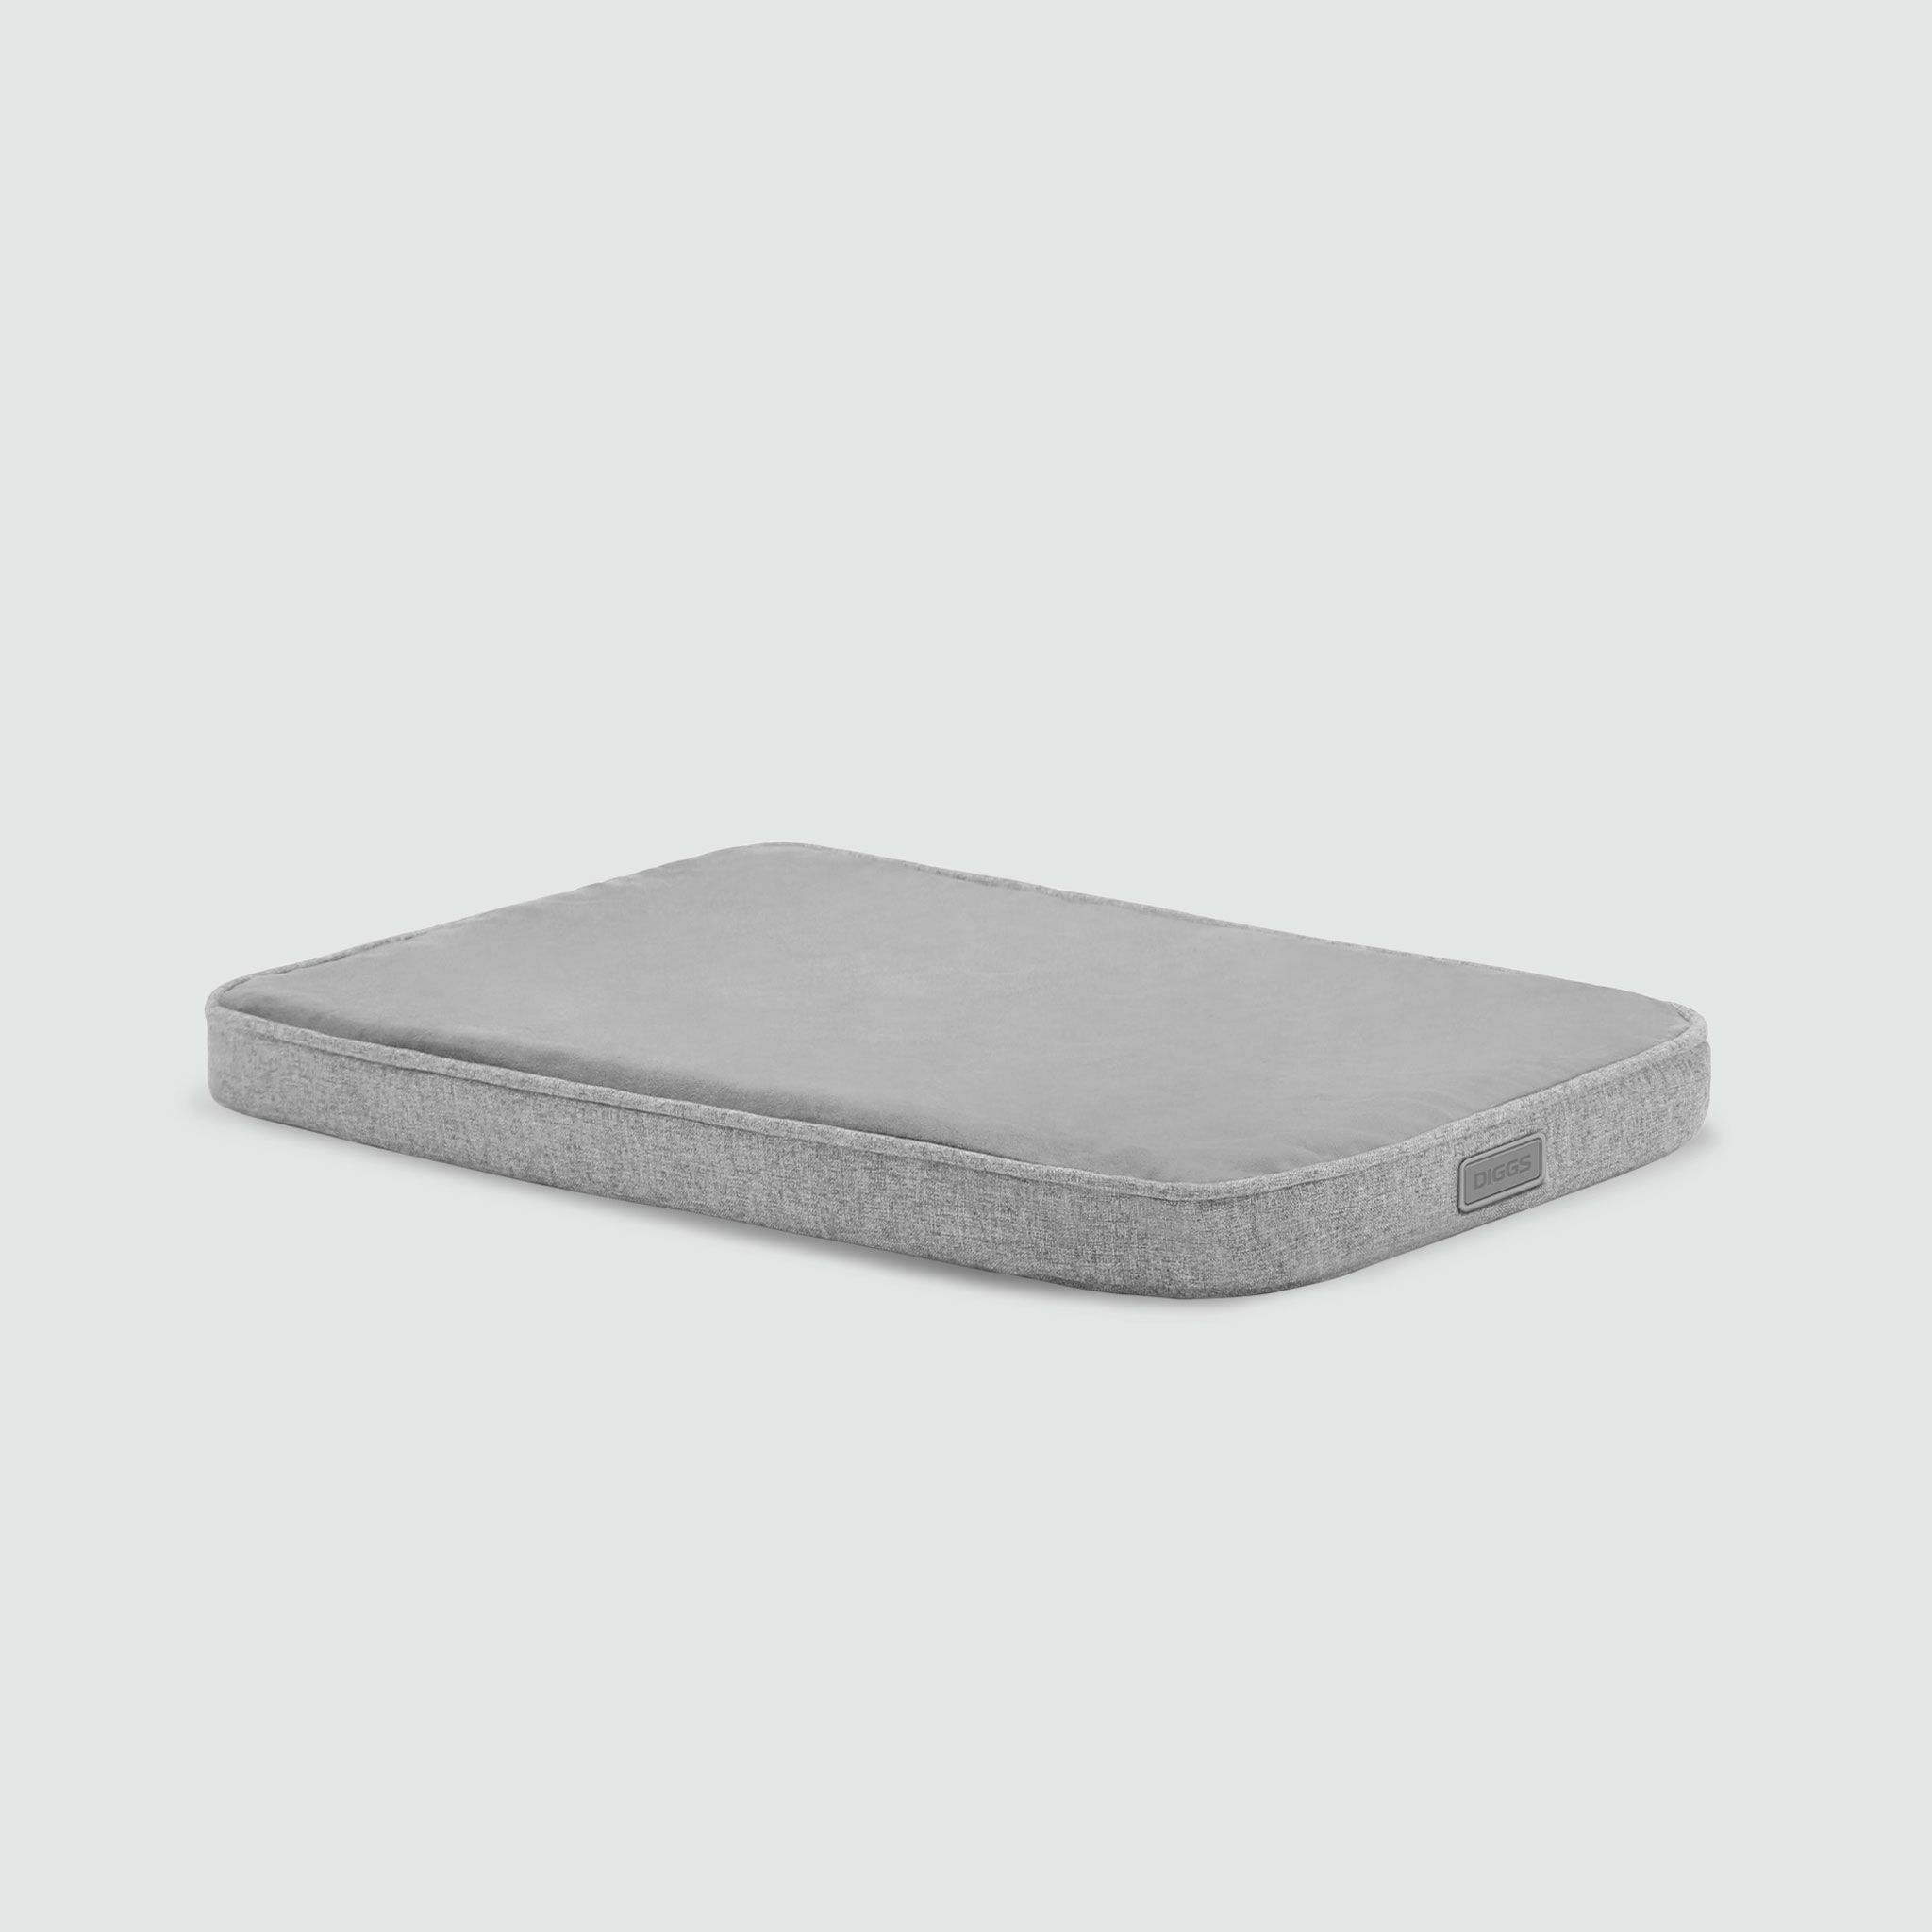 A gray mattress with no sheets on it